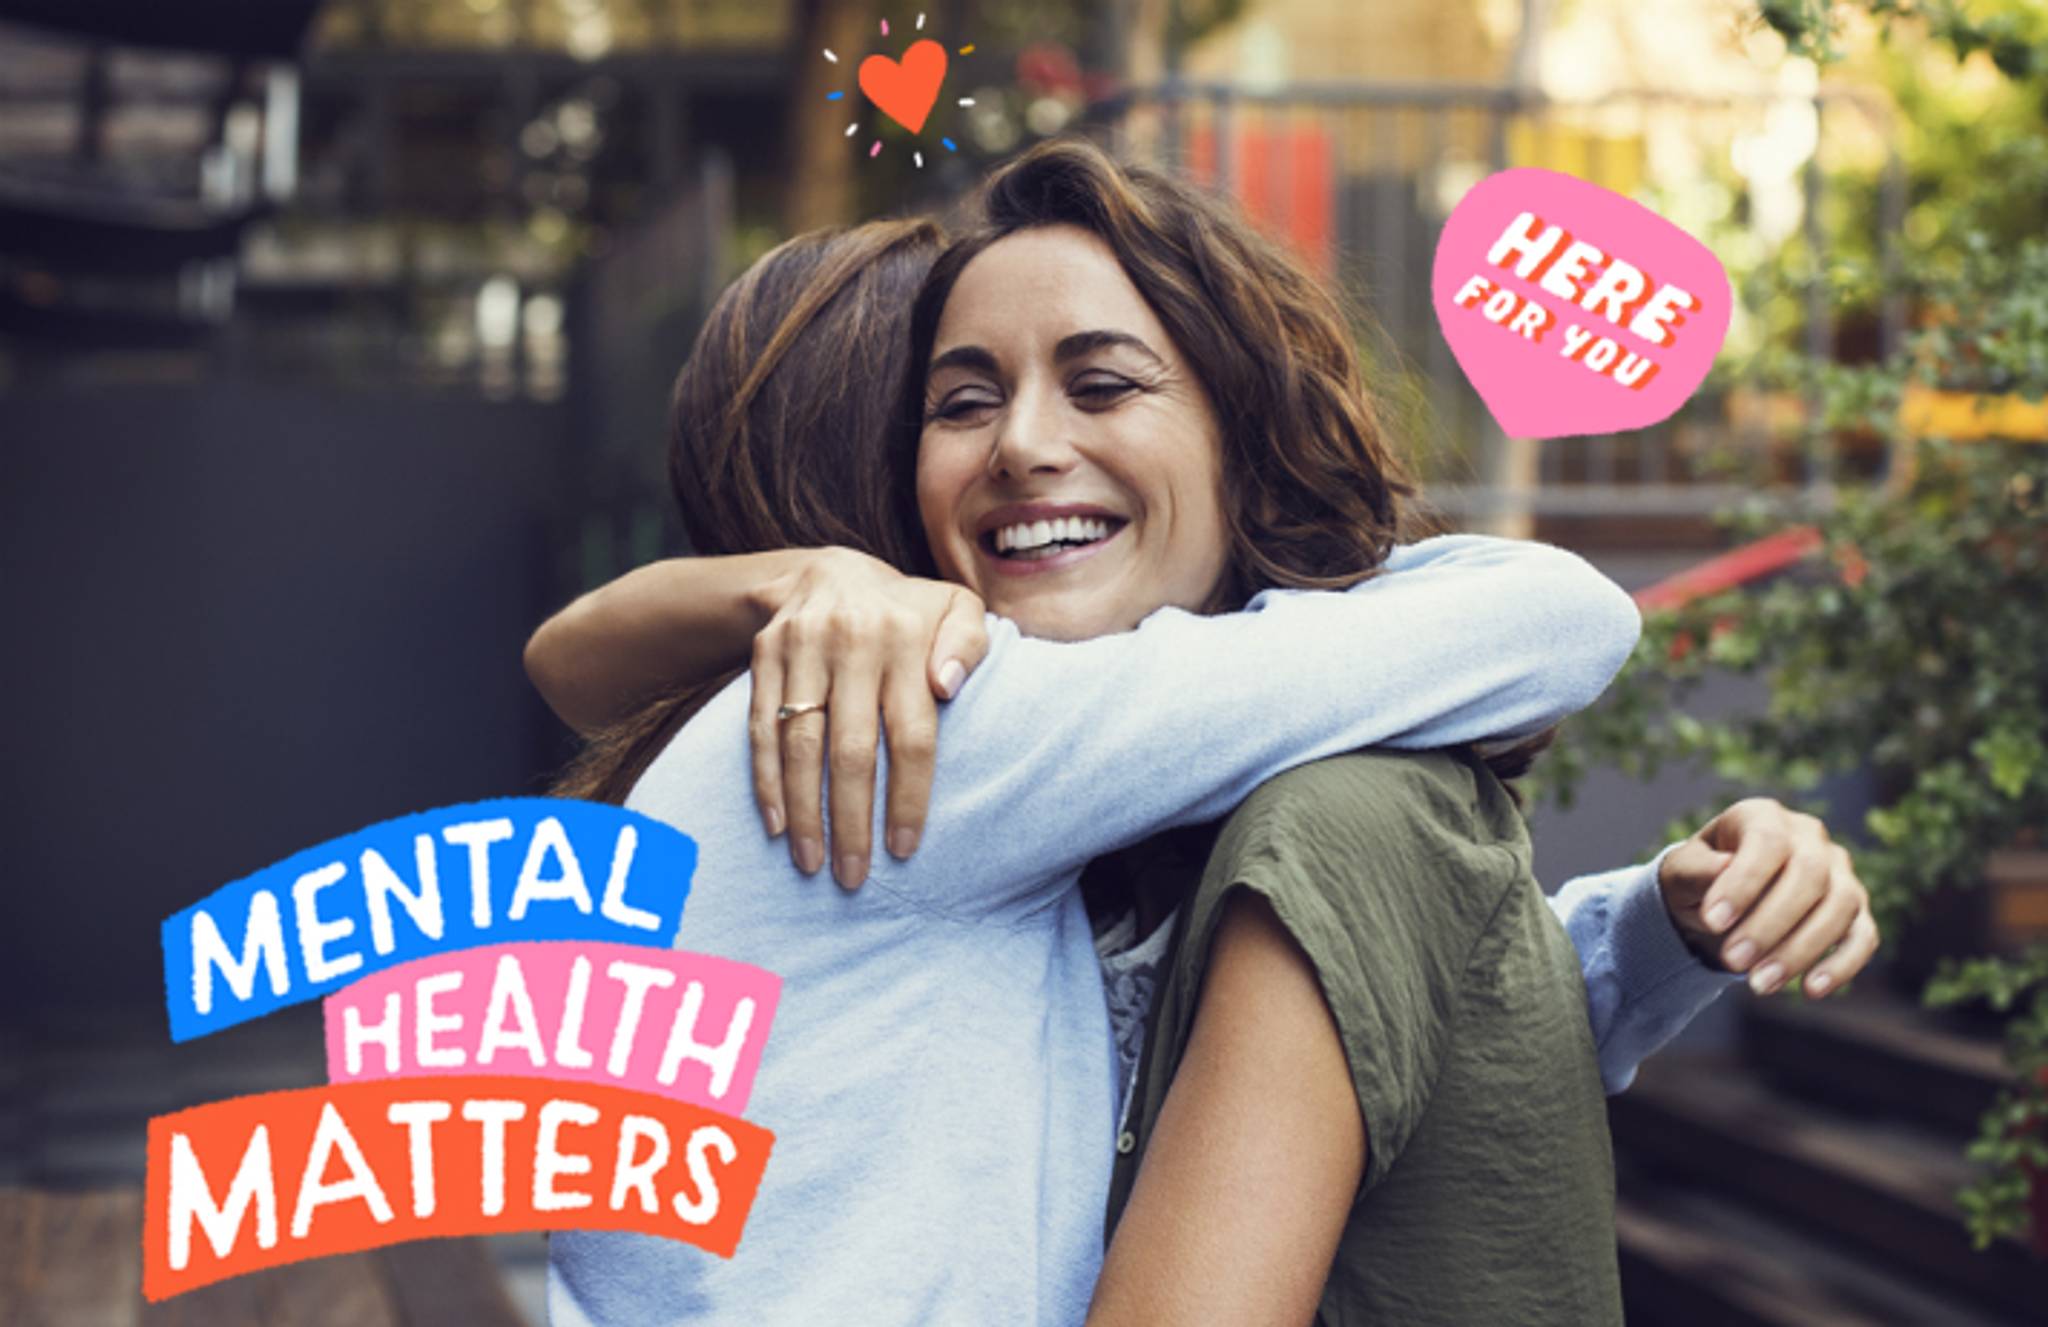 Facebook shows soft touch with mental health stickers